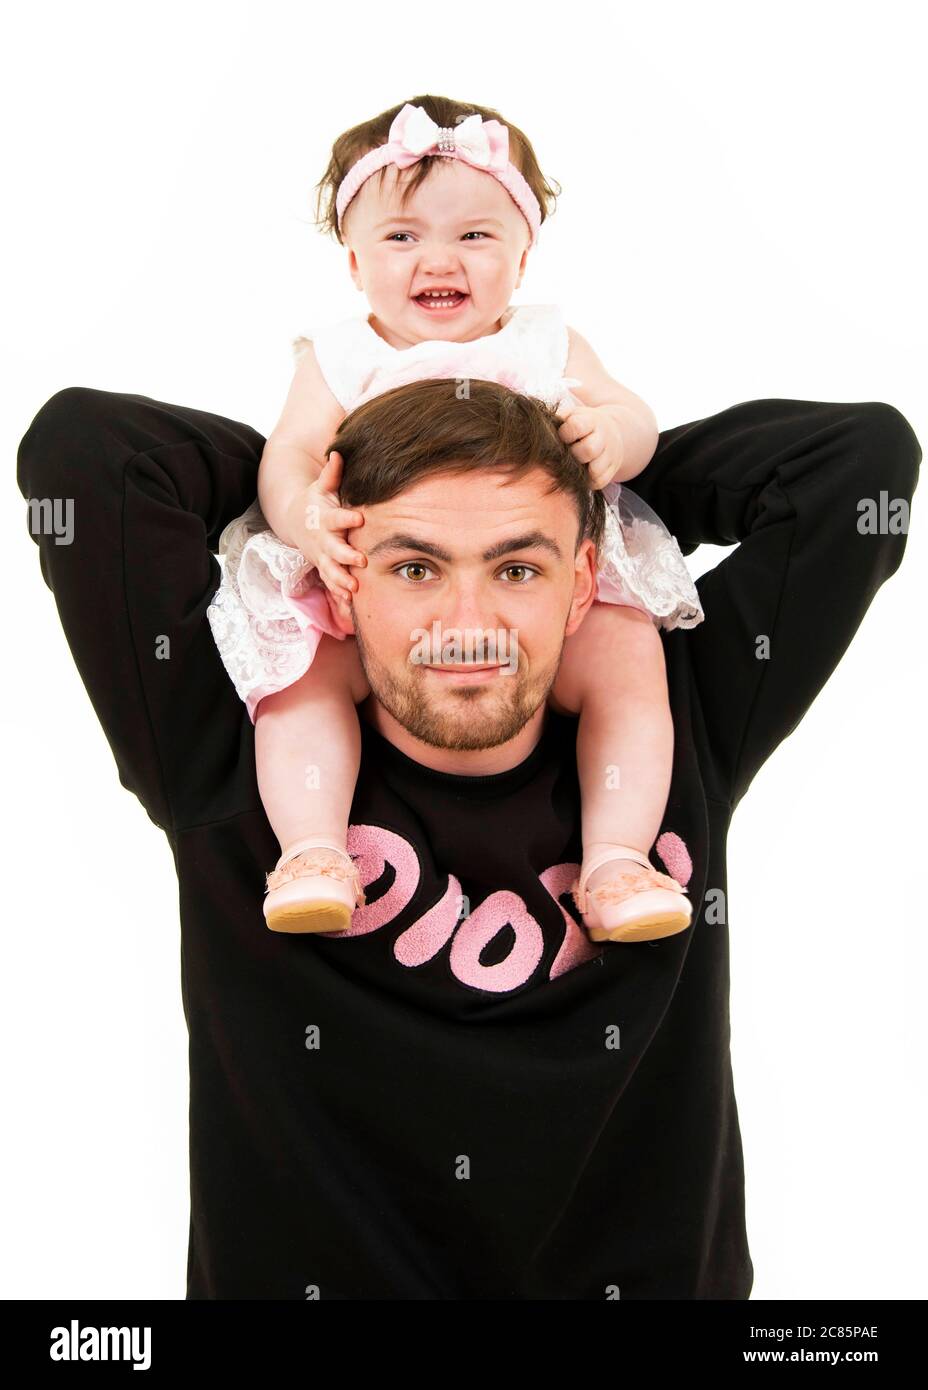 Vertical lifestyle portrait of a young dad with his baby daughter on his shoulders. Stock Photo